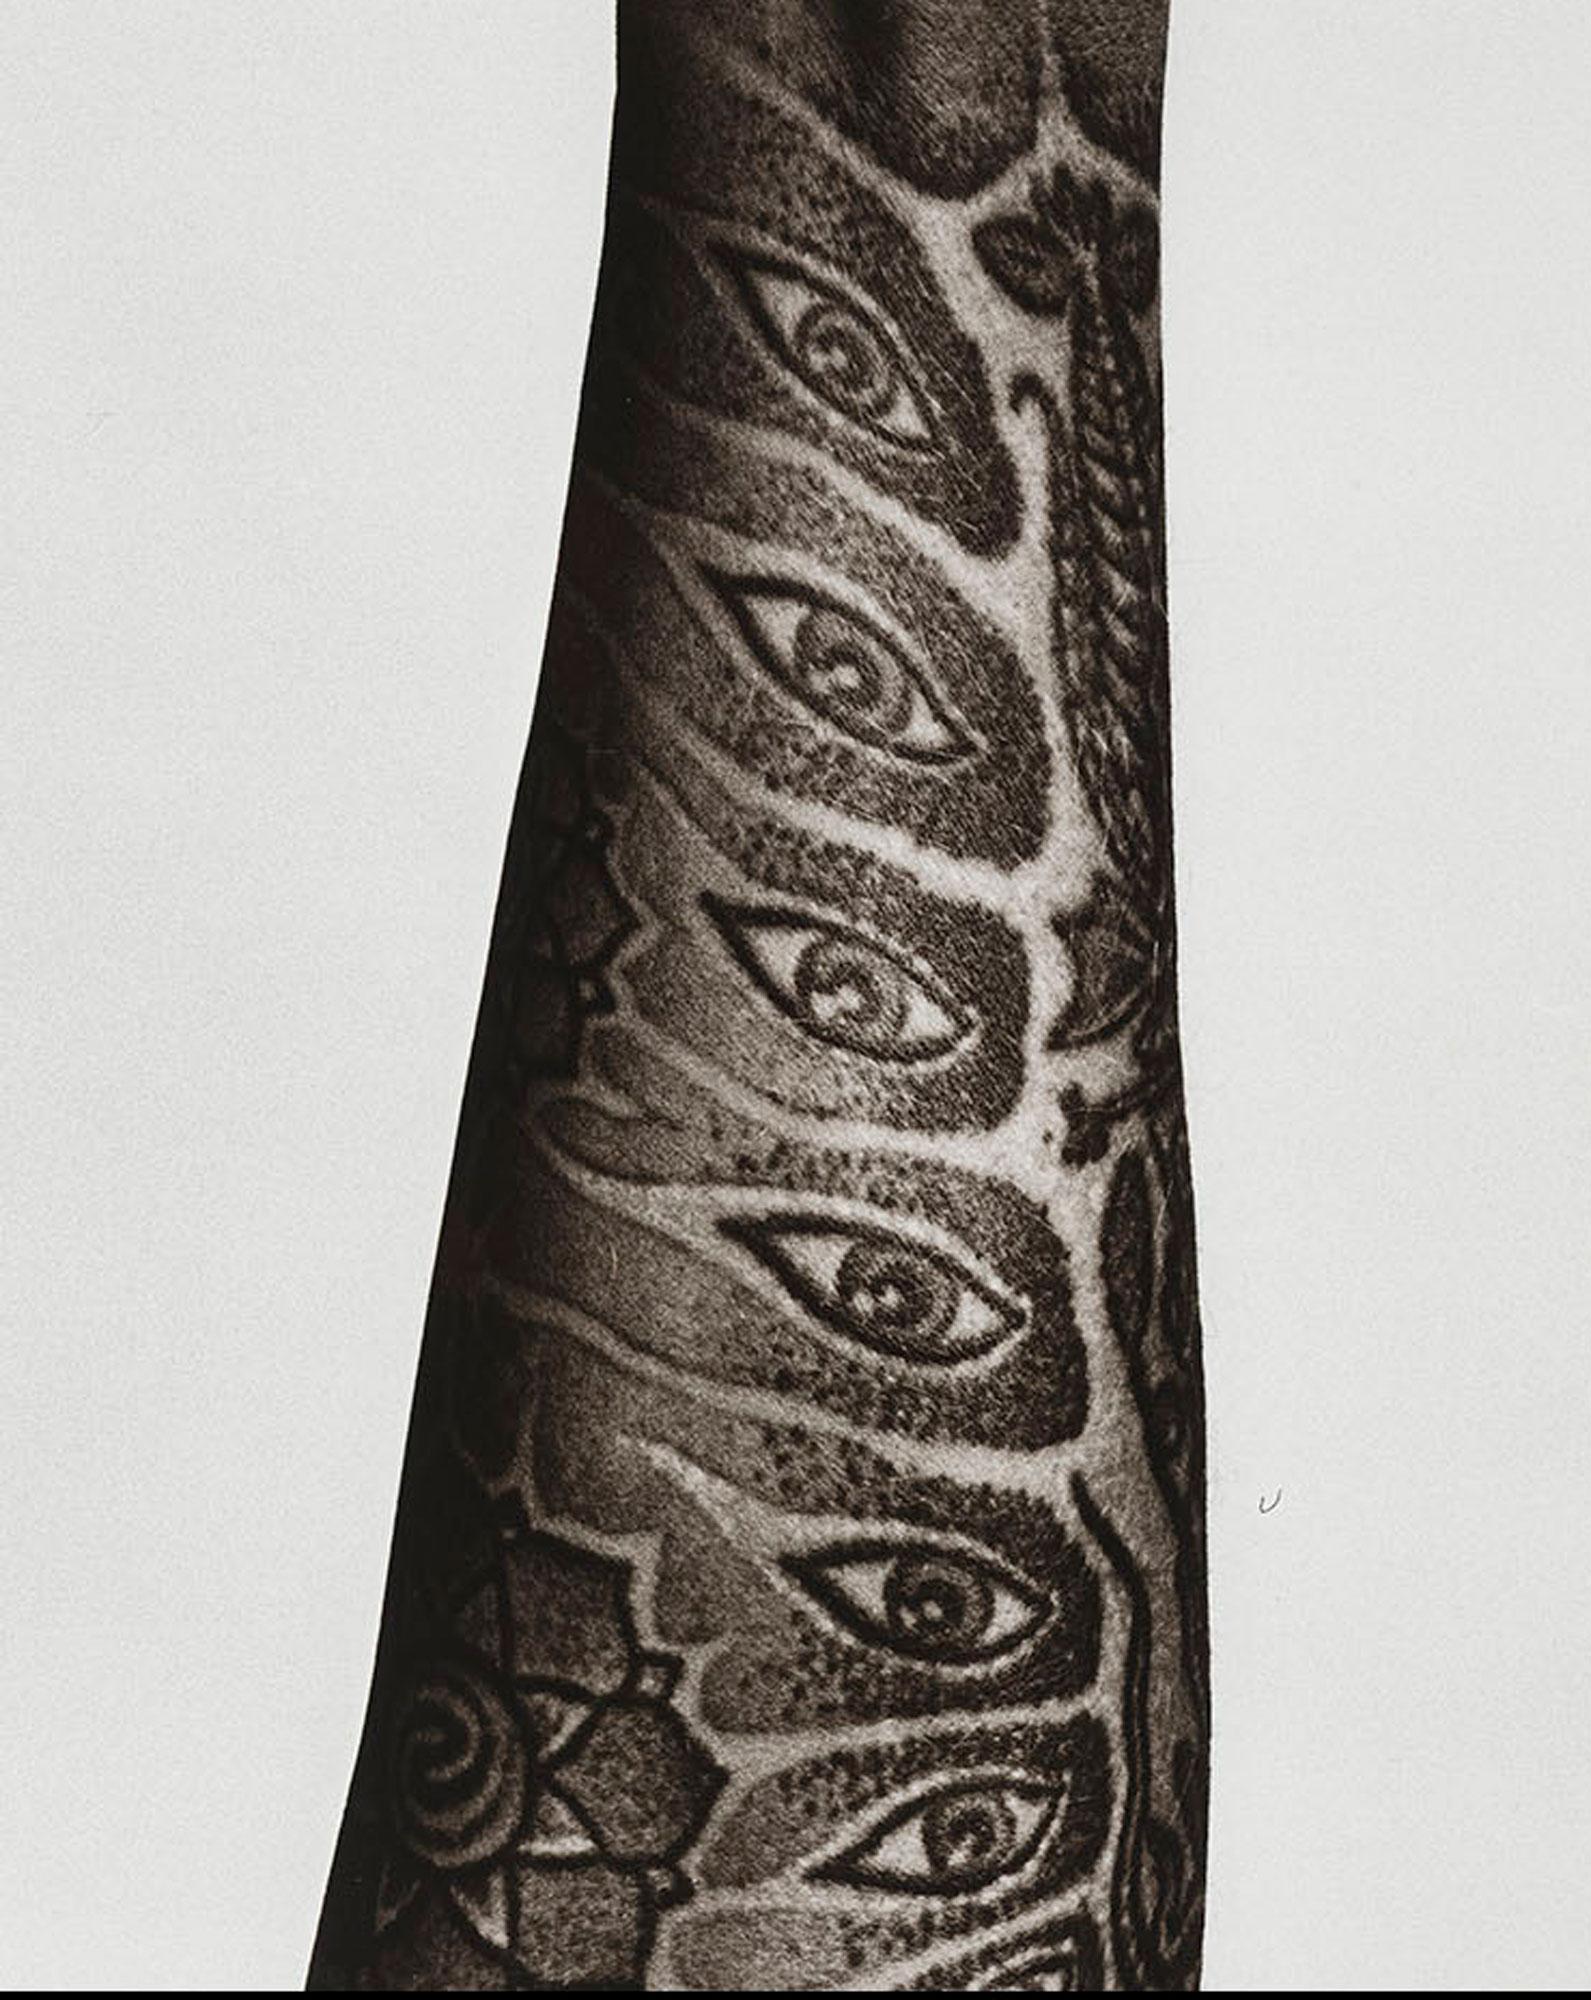 Hand II, Russia - Contemporary Photograph by Jan C. Schlegel